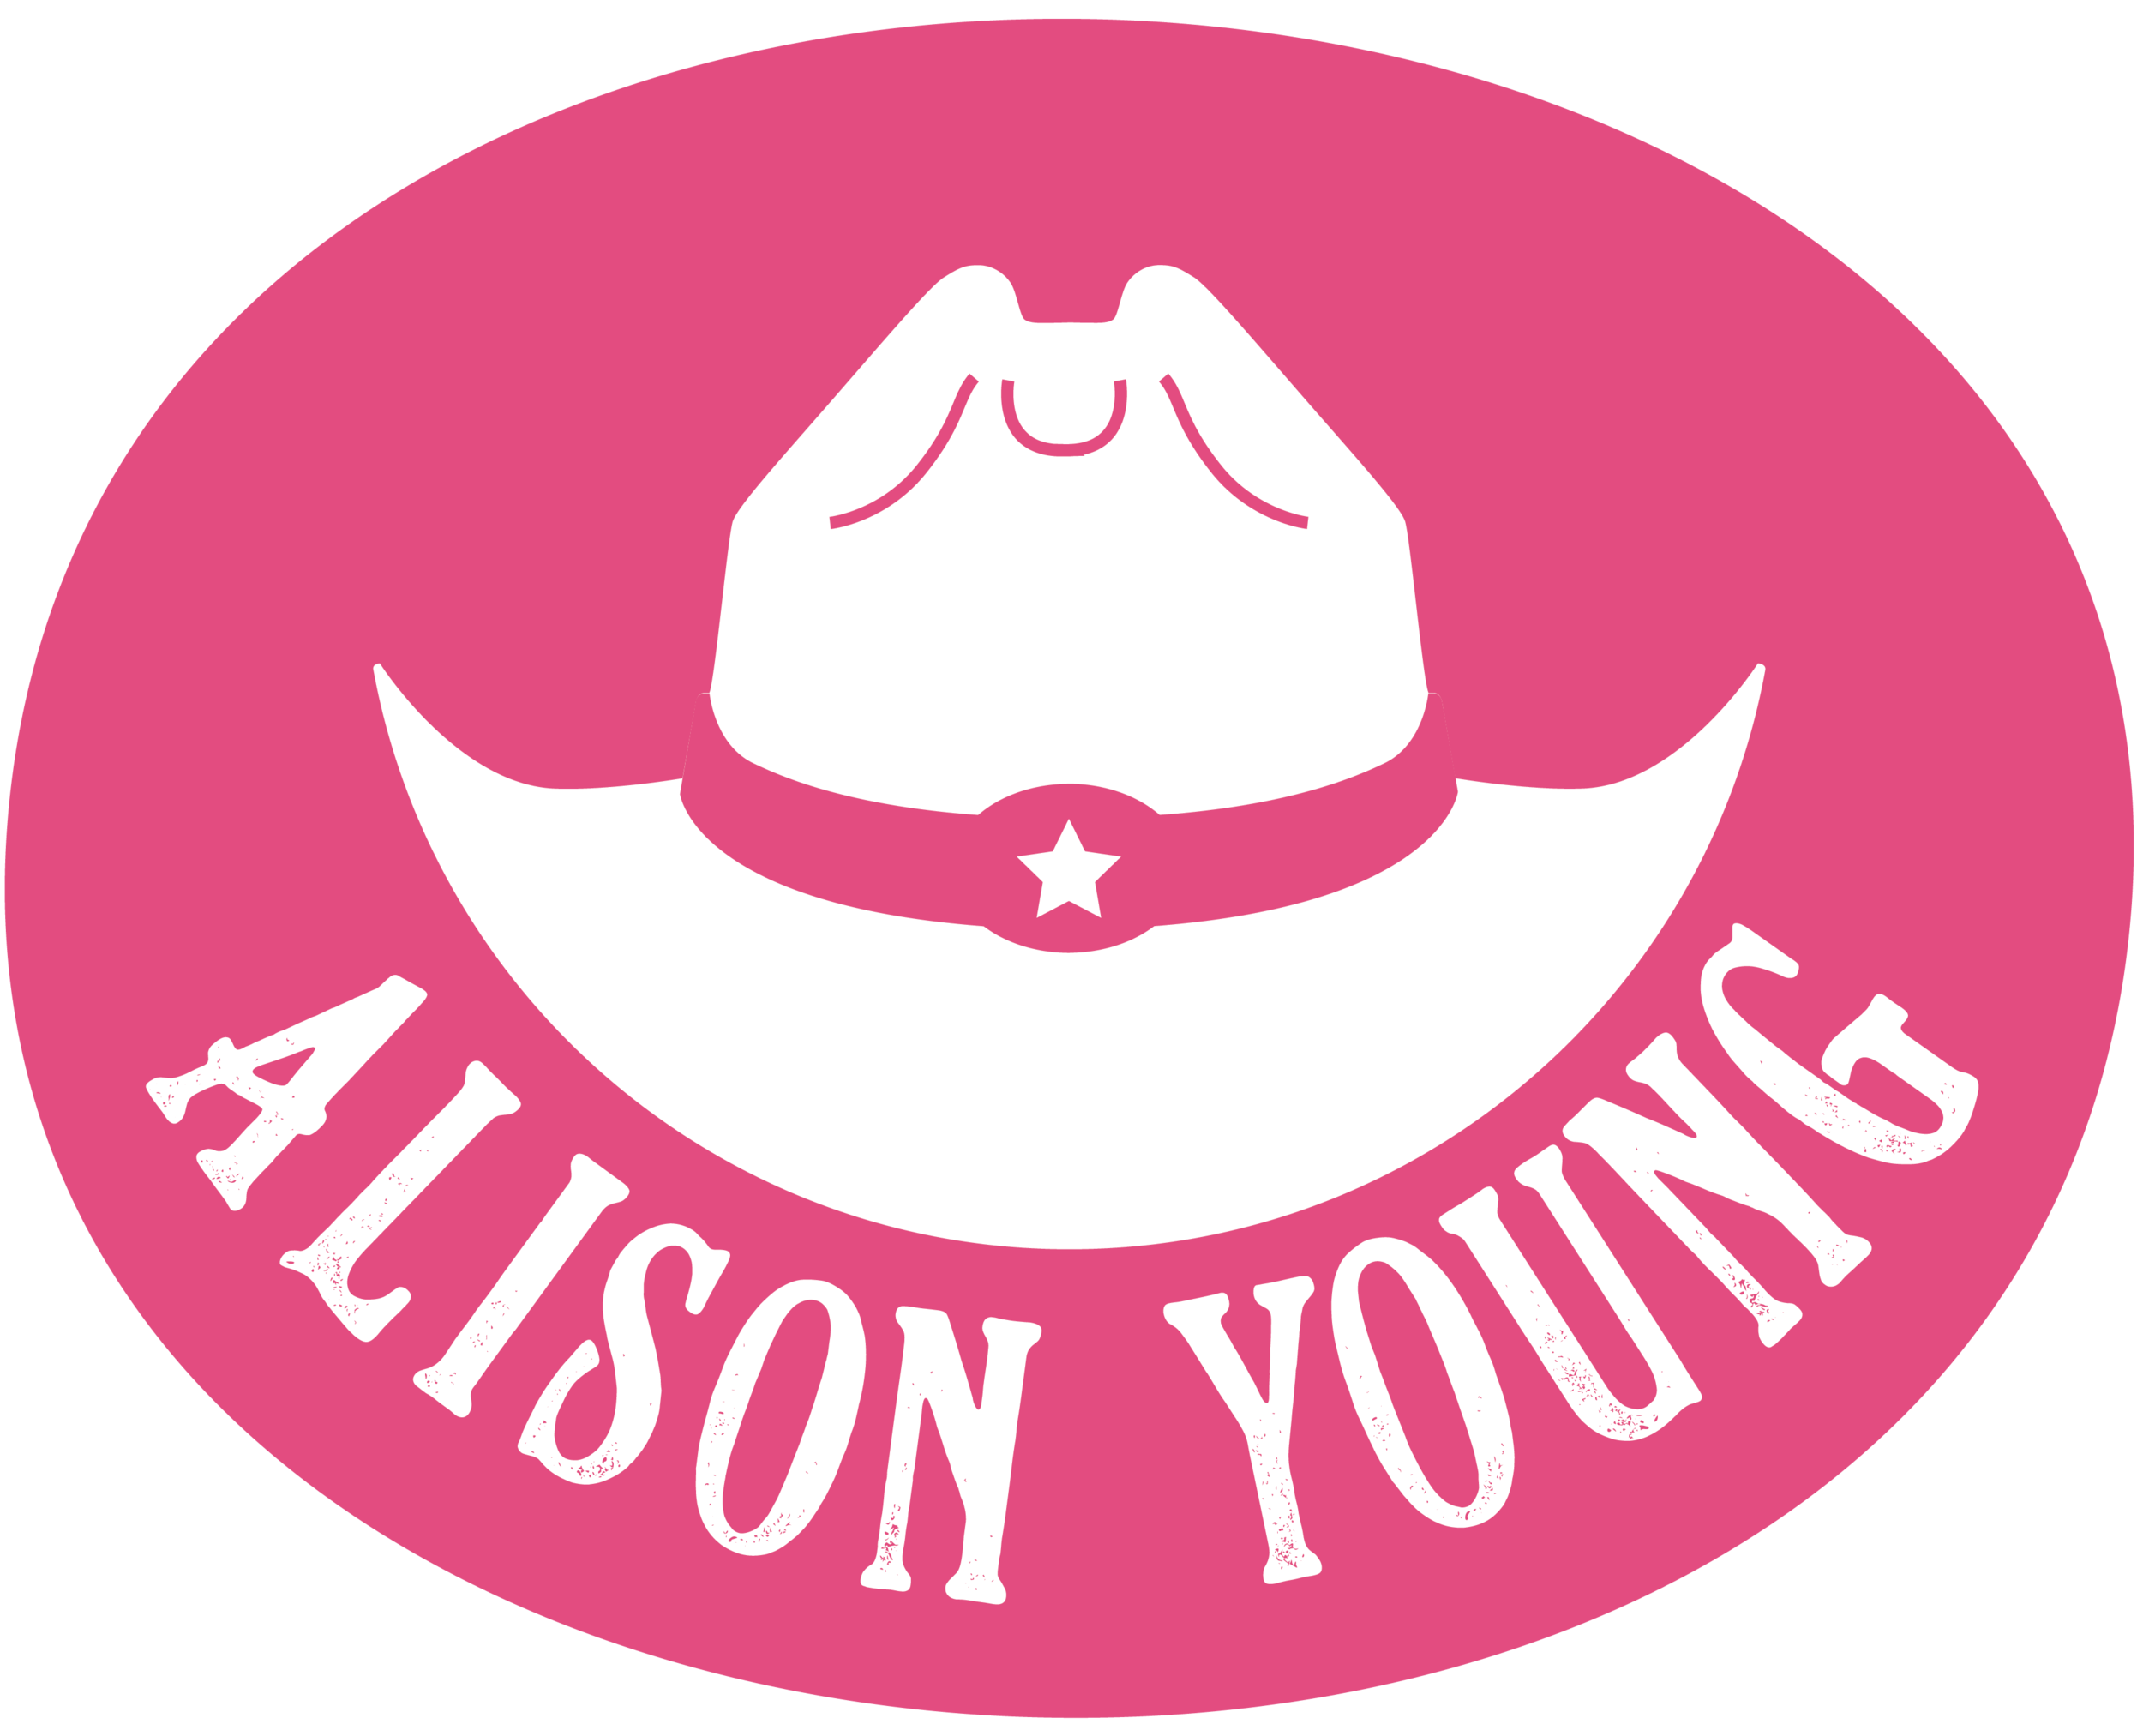 Alison Young